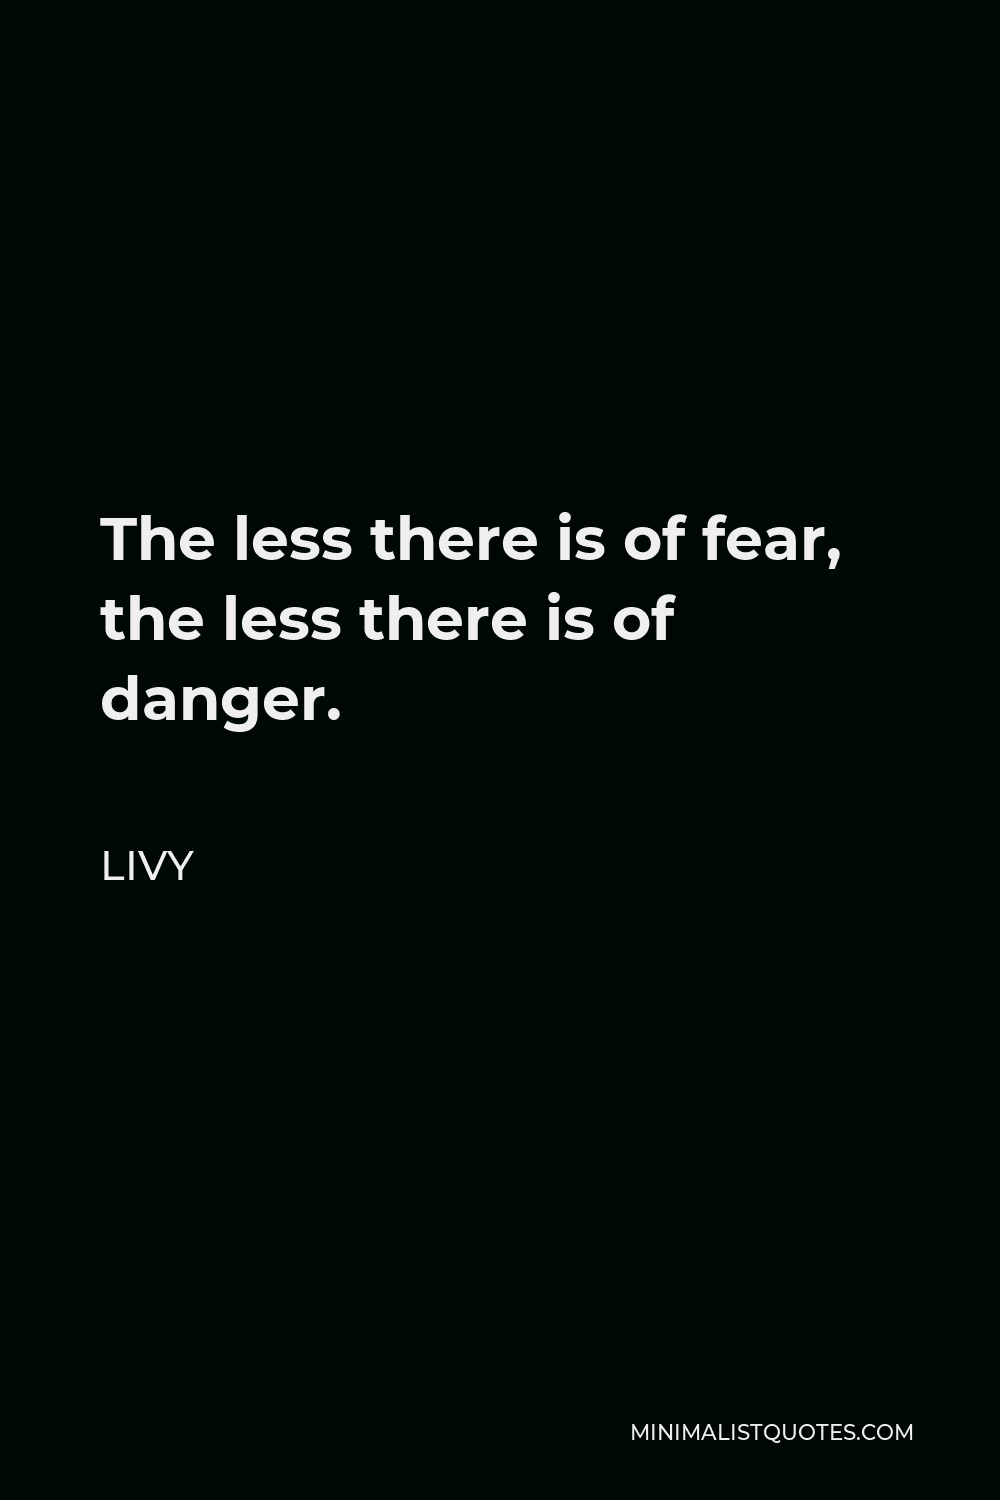 Livy Quote - The less there is of fear, the less there is of danger.